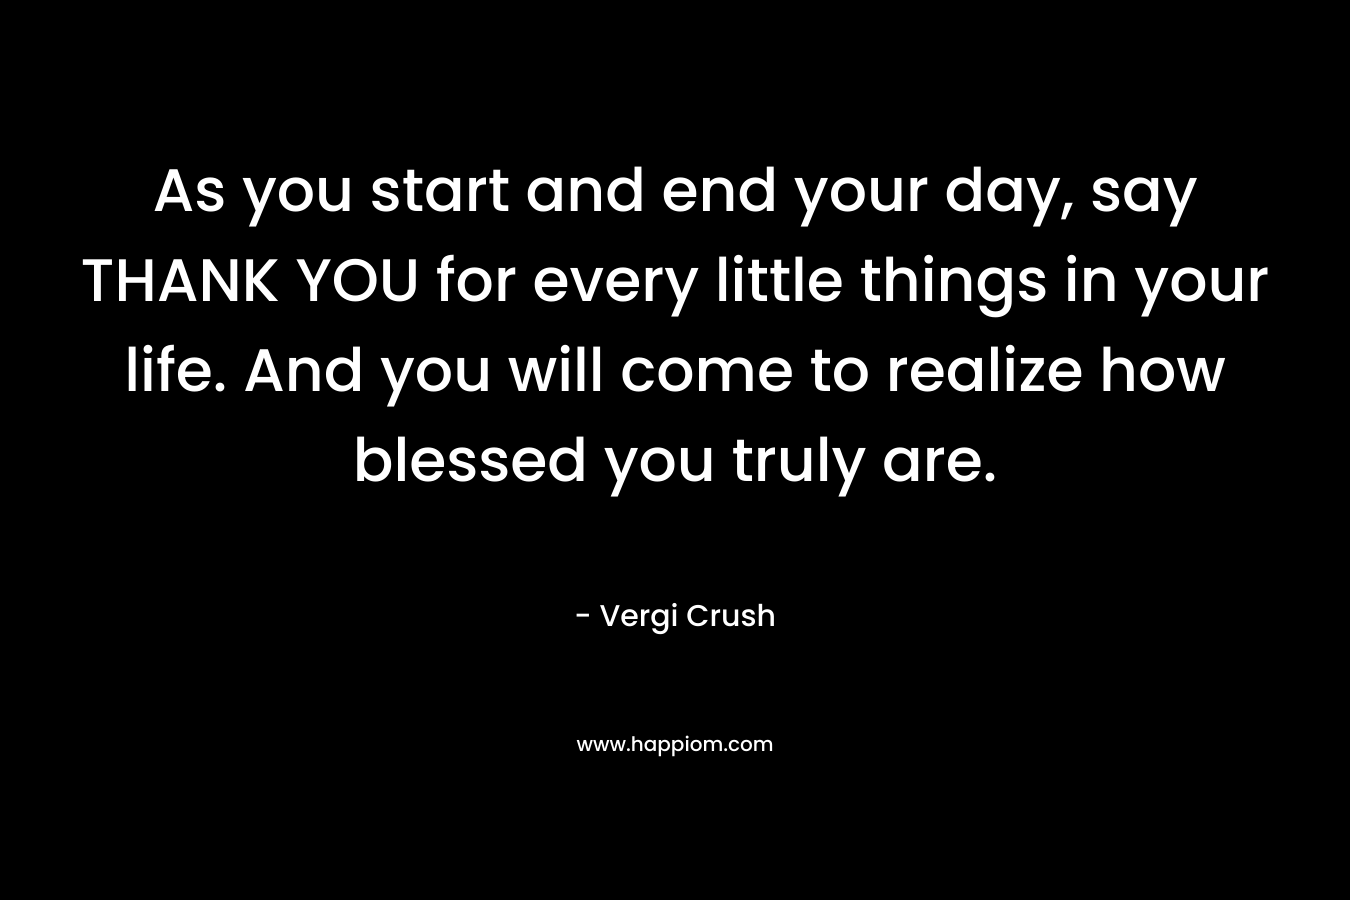 As you start and end your day, say THANK YOU for every little things in your life. And you will come to realize how blessed you truly are. – Vergi Crush